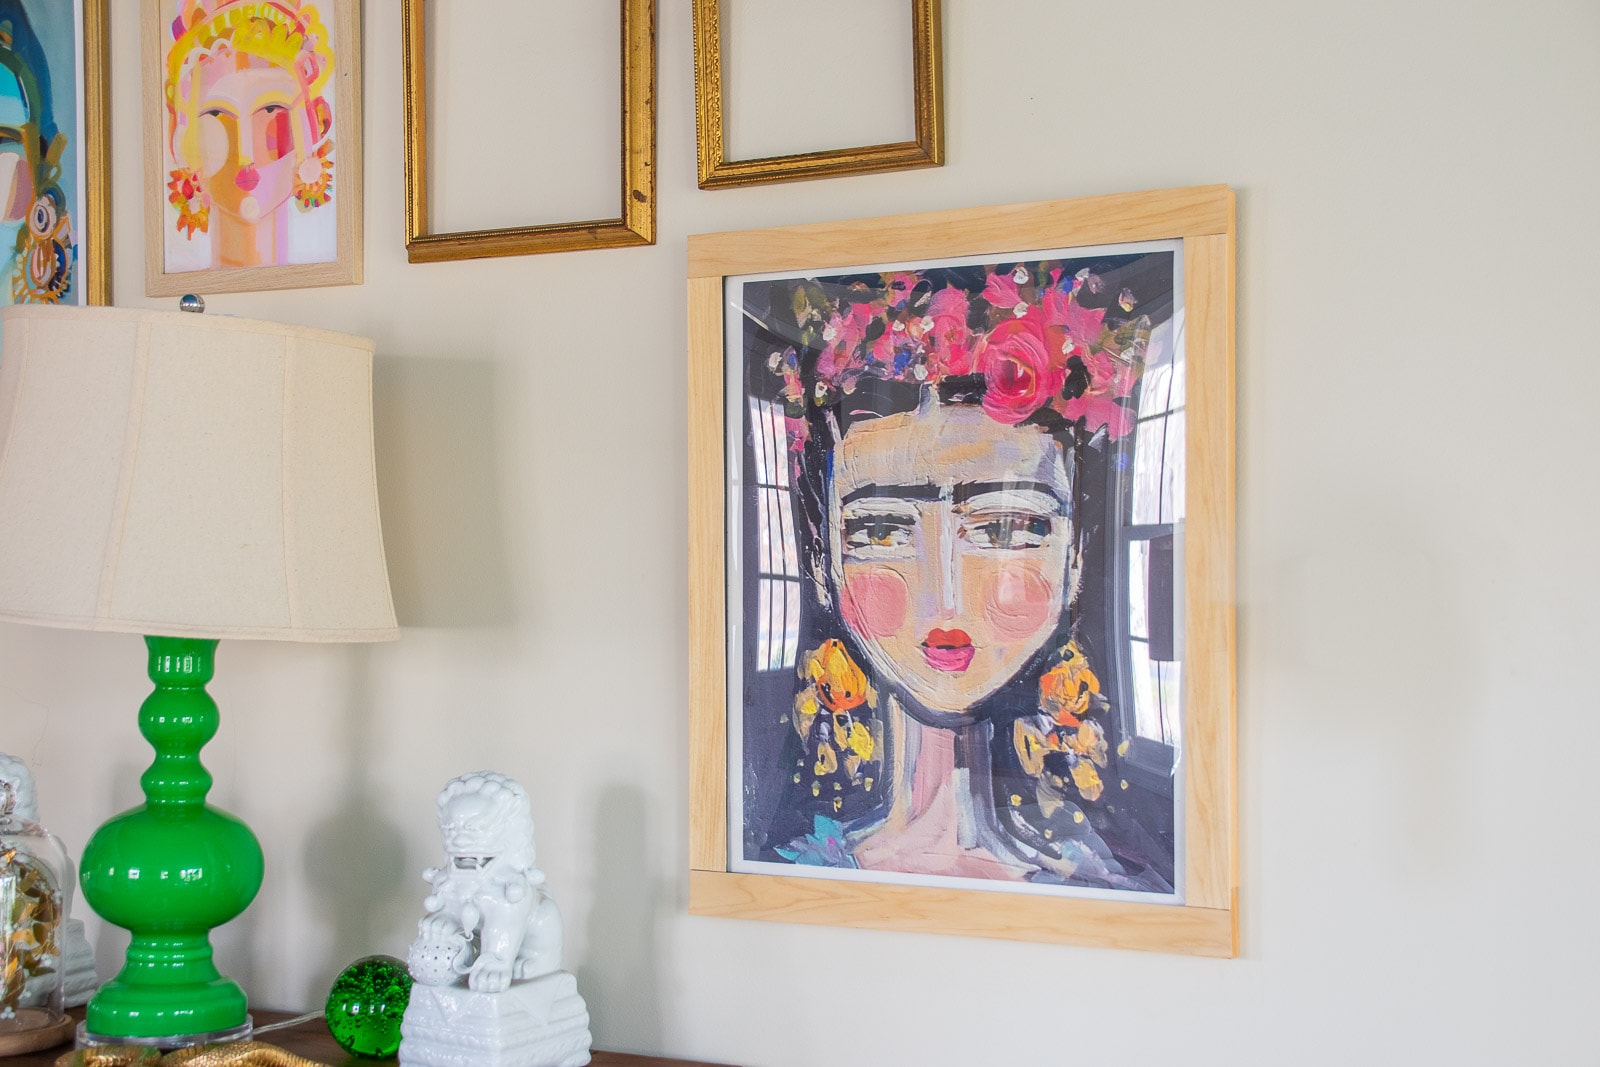 How to Make a Budget Wooden Frame